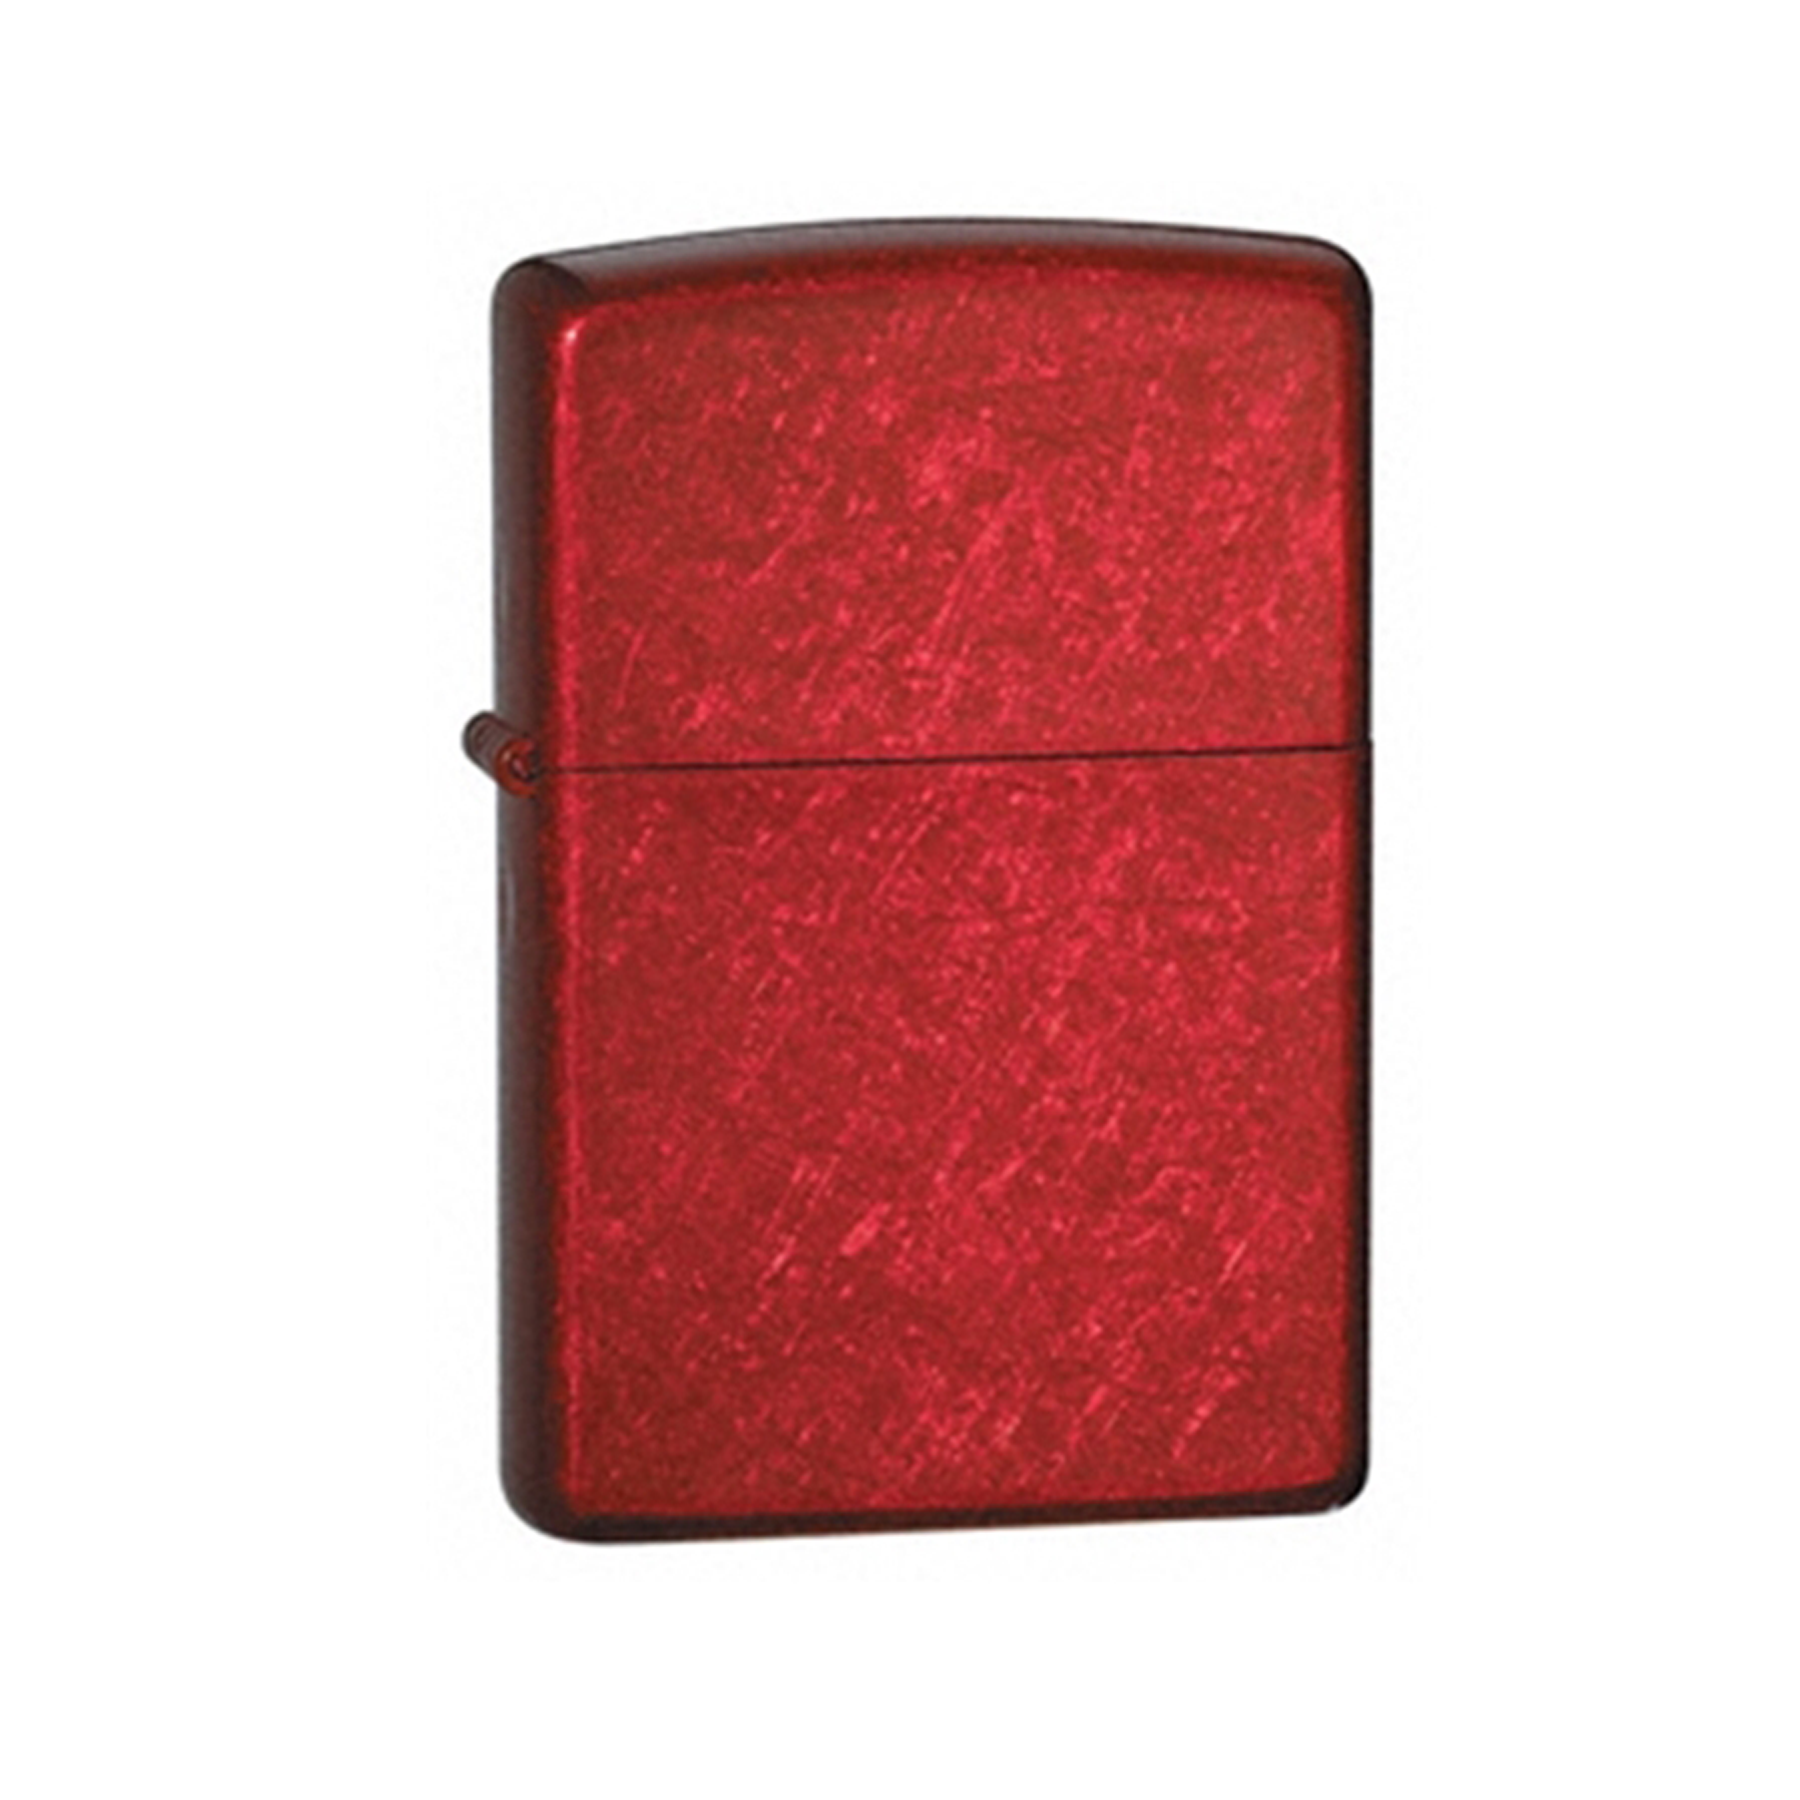 Zippo Candy Apple Red